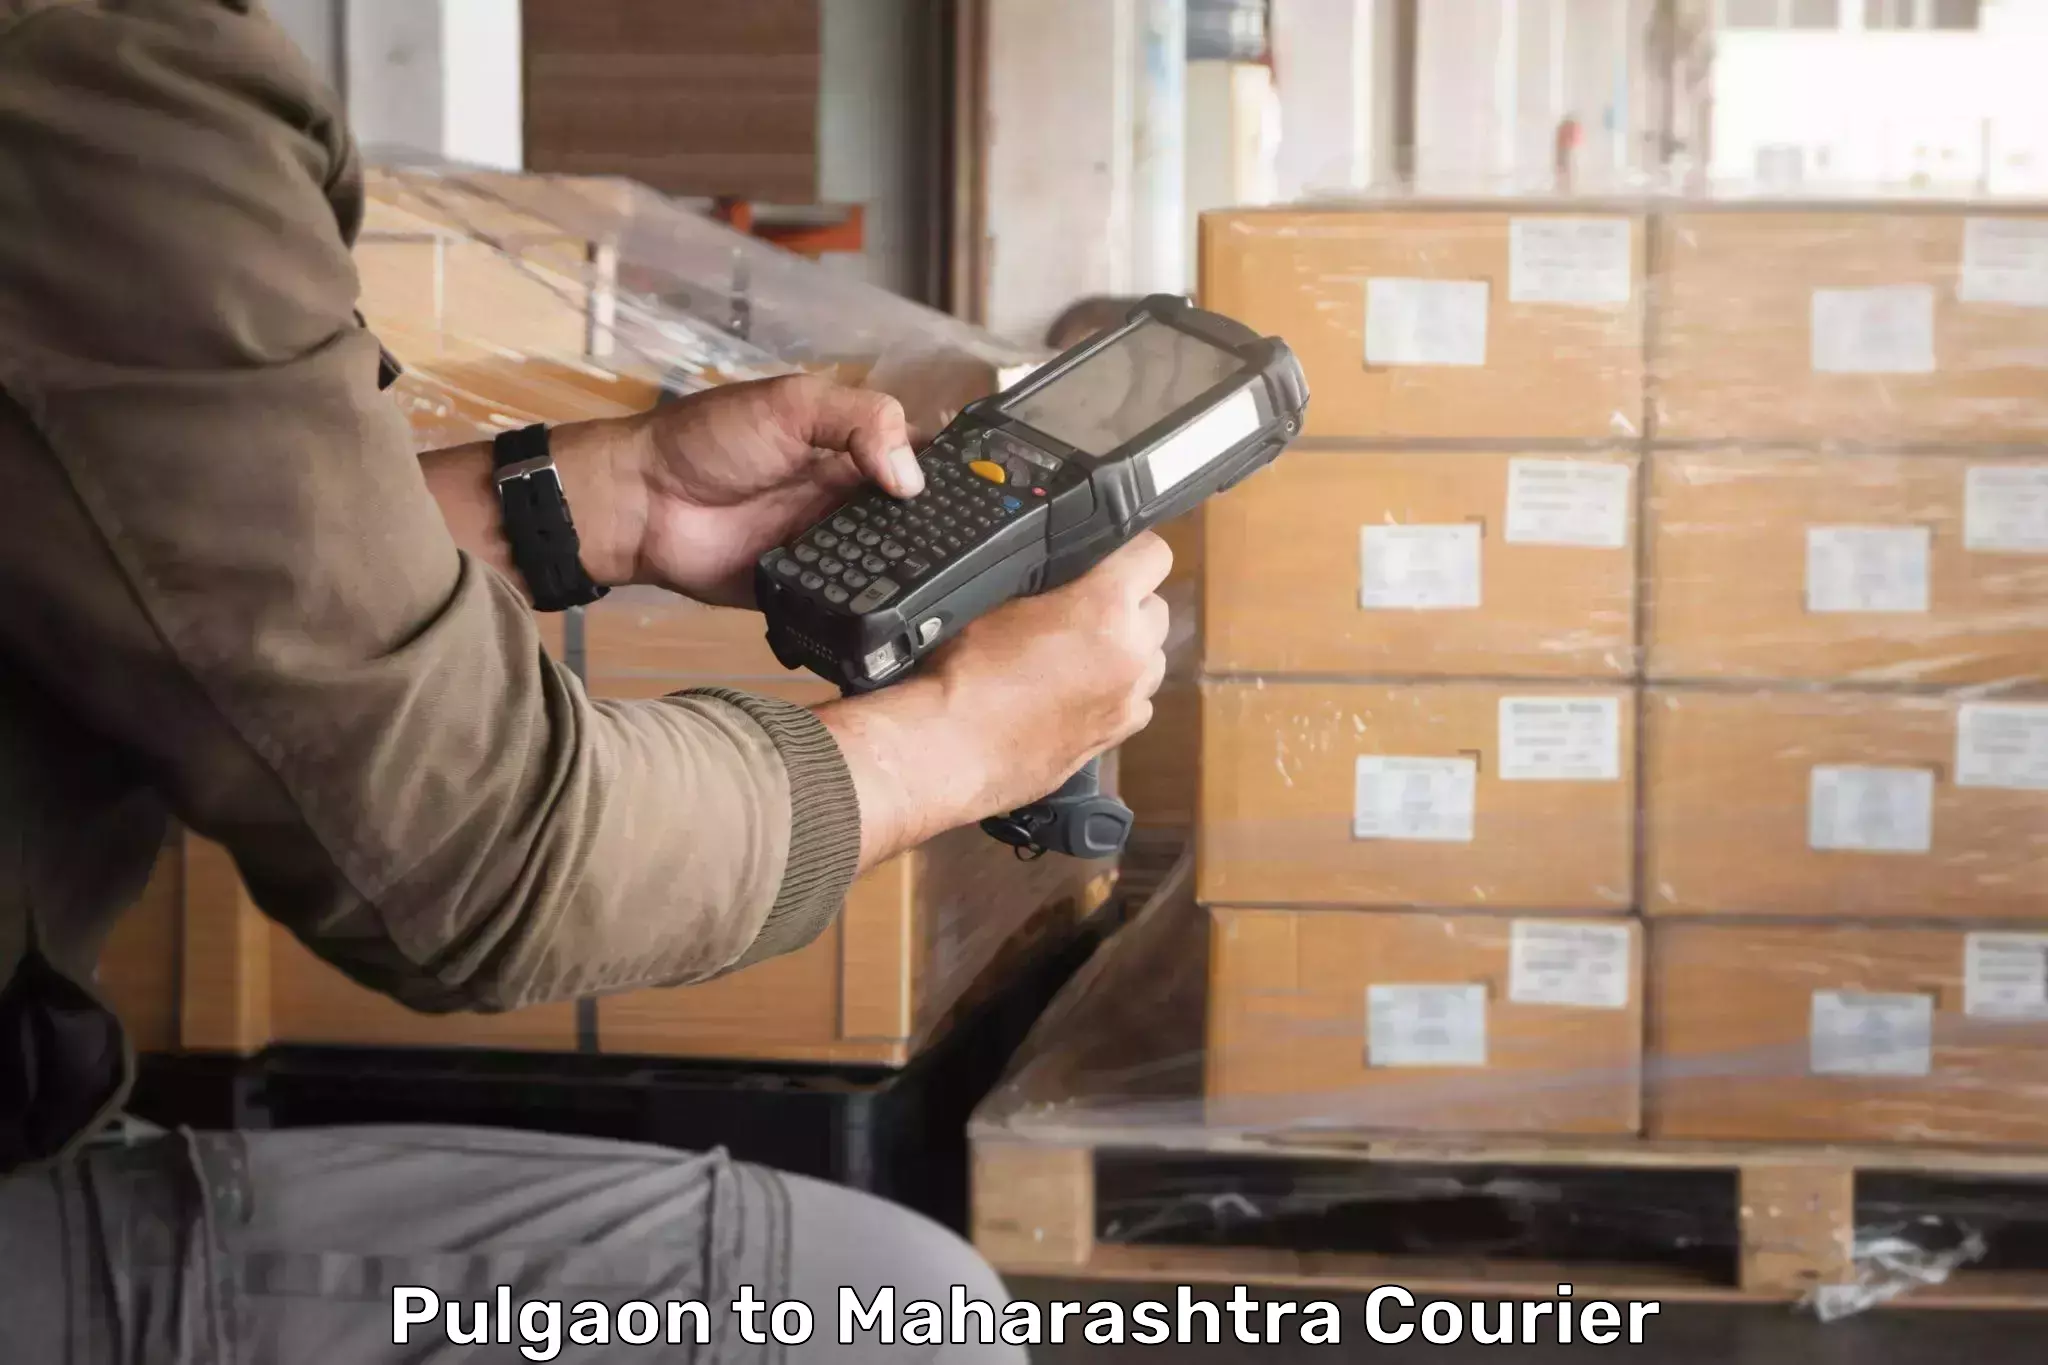 24/7 courier service in Pulgaon to Akkalkuva